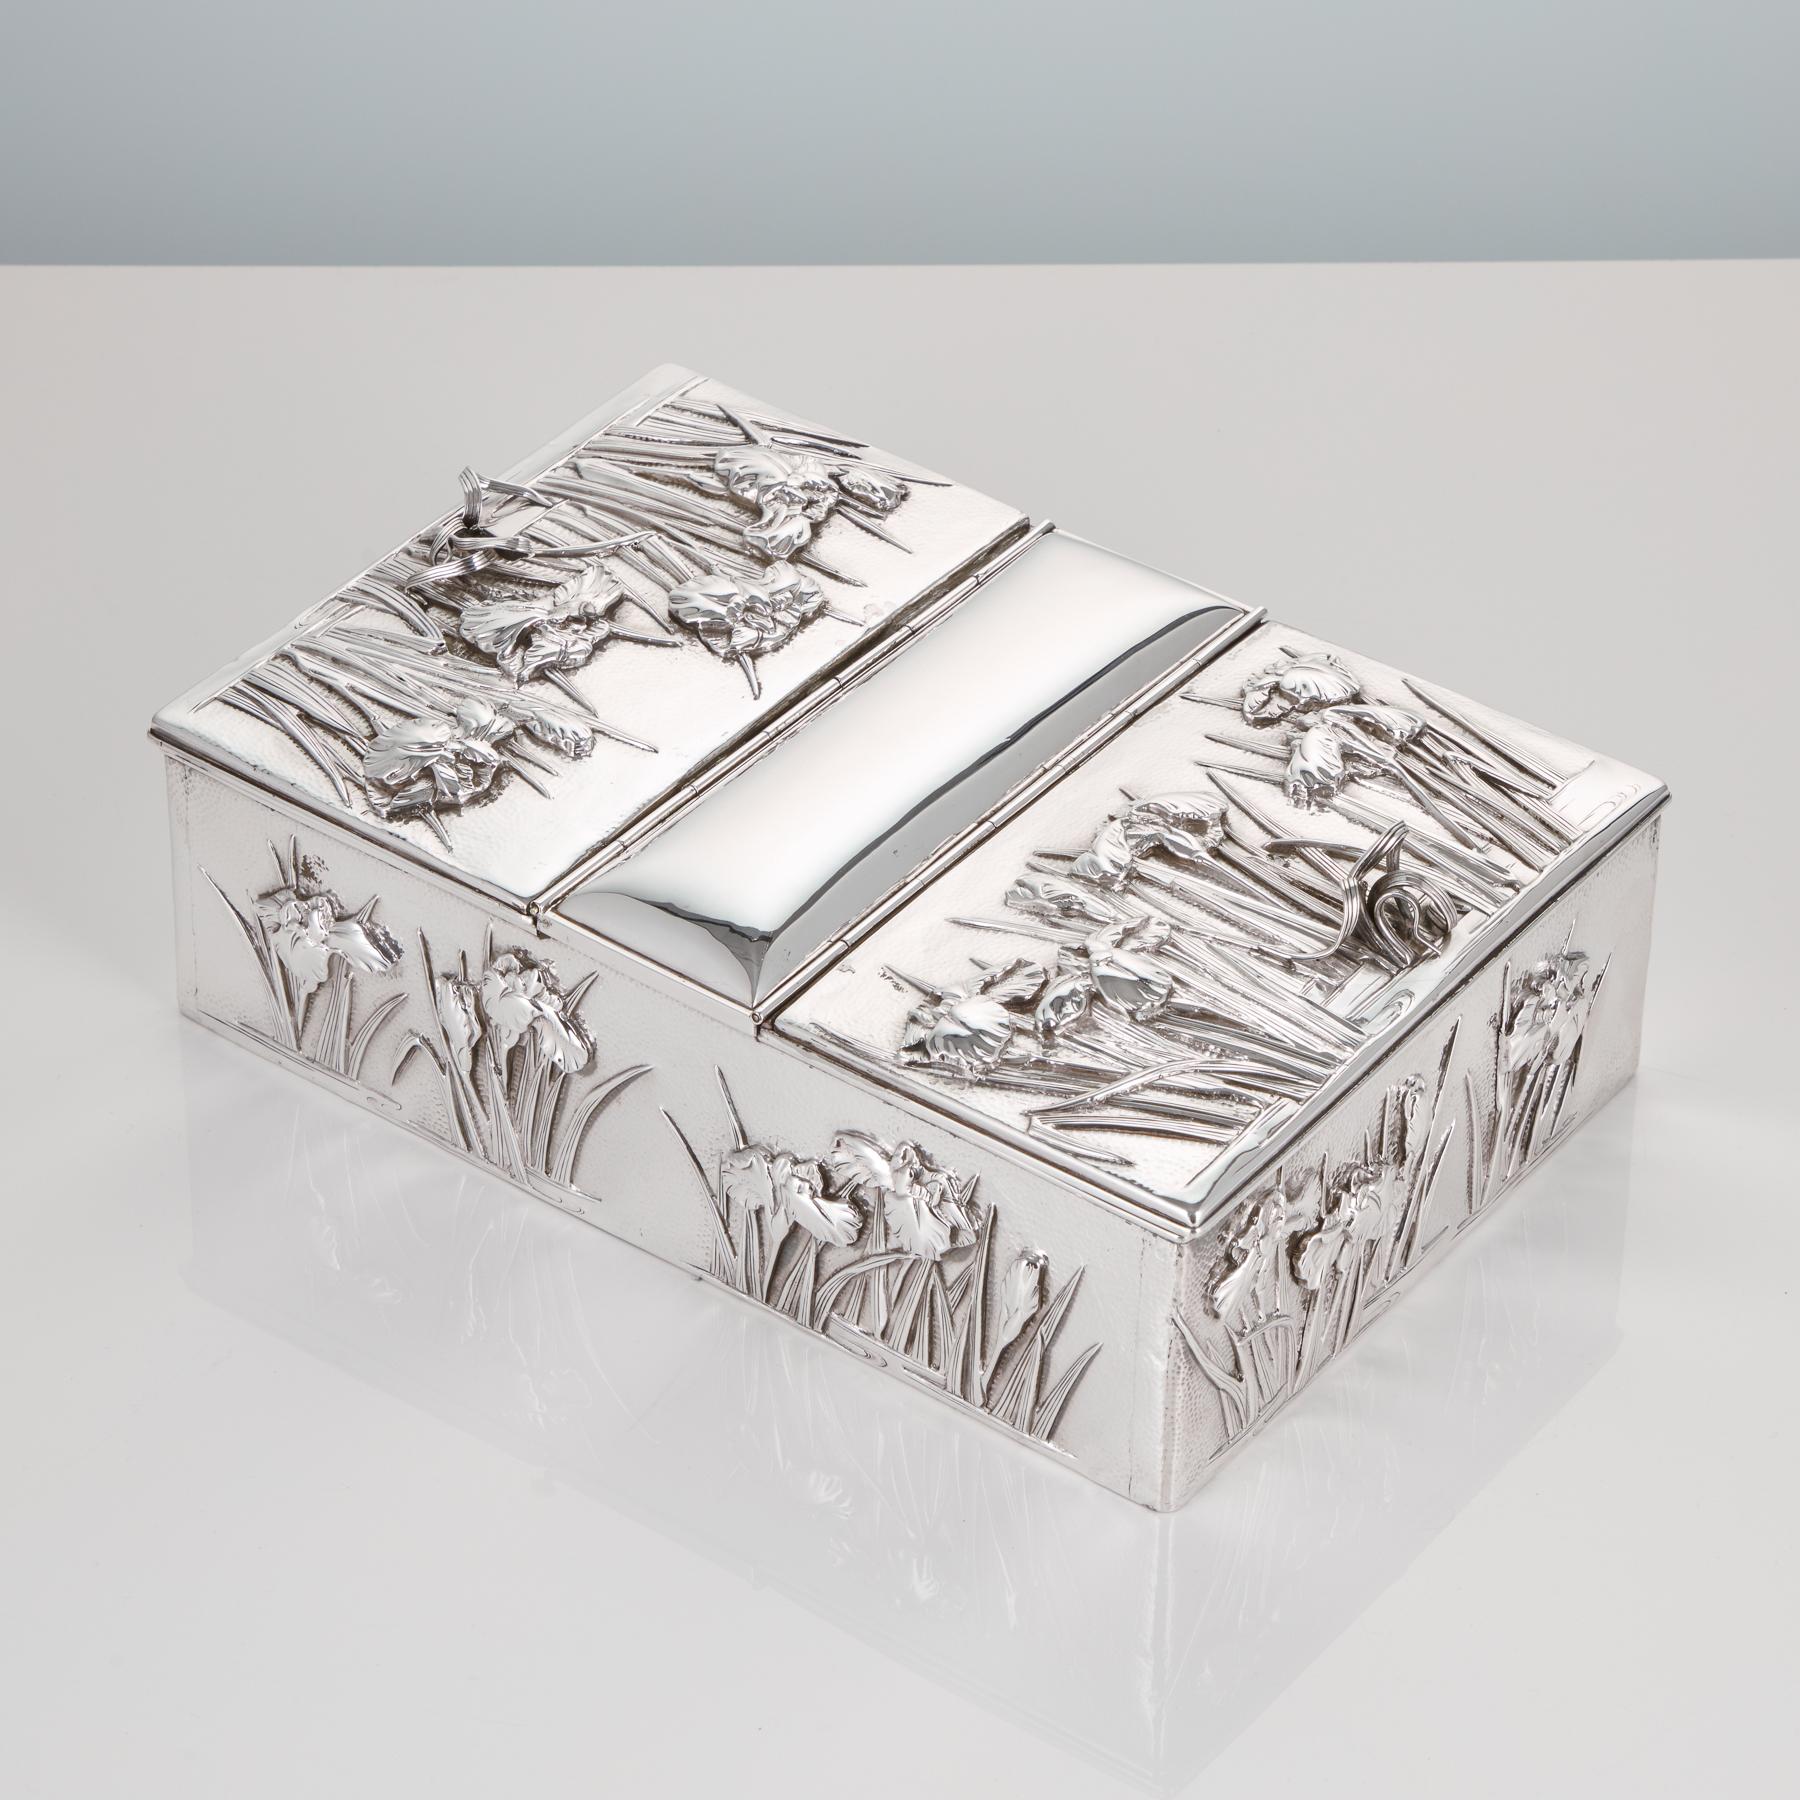 Antique early 20th century Japanese silver box with overlaid iris decoration from the Muji period, circa 1910
A decorative Japanese silver box with 2 compartments.
The hammered surface and the richly overlaid Iris flower decoration really enhance